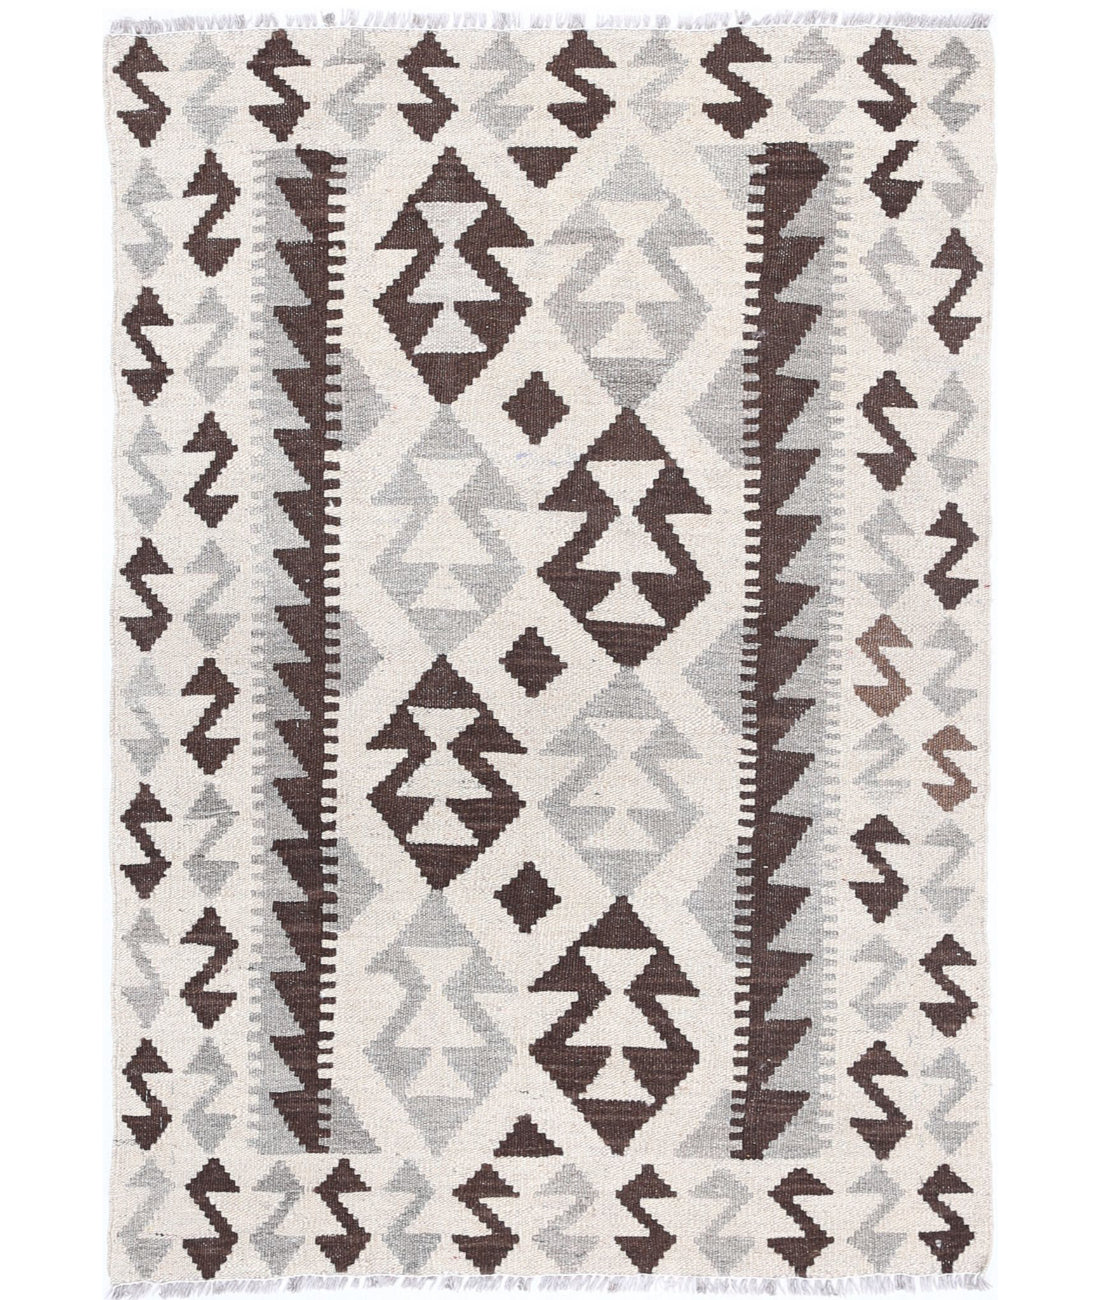 Hand Knotted Natural Kilim Wool Kilim Rug - 2'9'' x 3'10'' 2'9'' x 3'10'' (83 X 115) / Ivory / Taupe